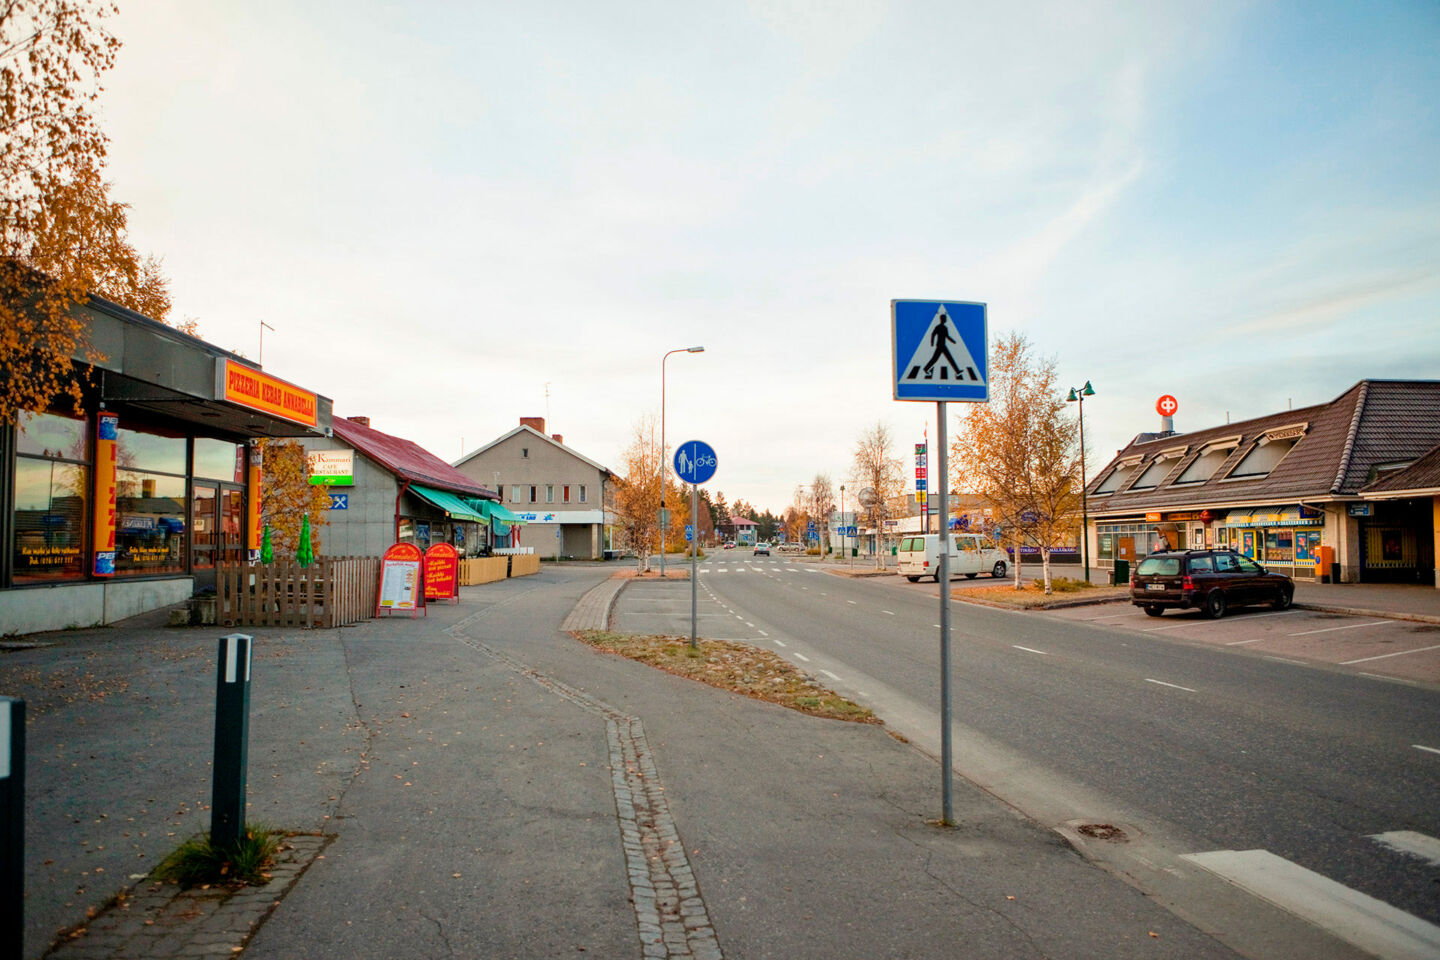 A small town street in downtown Sodankylä, a Finnish Lapland filming location